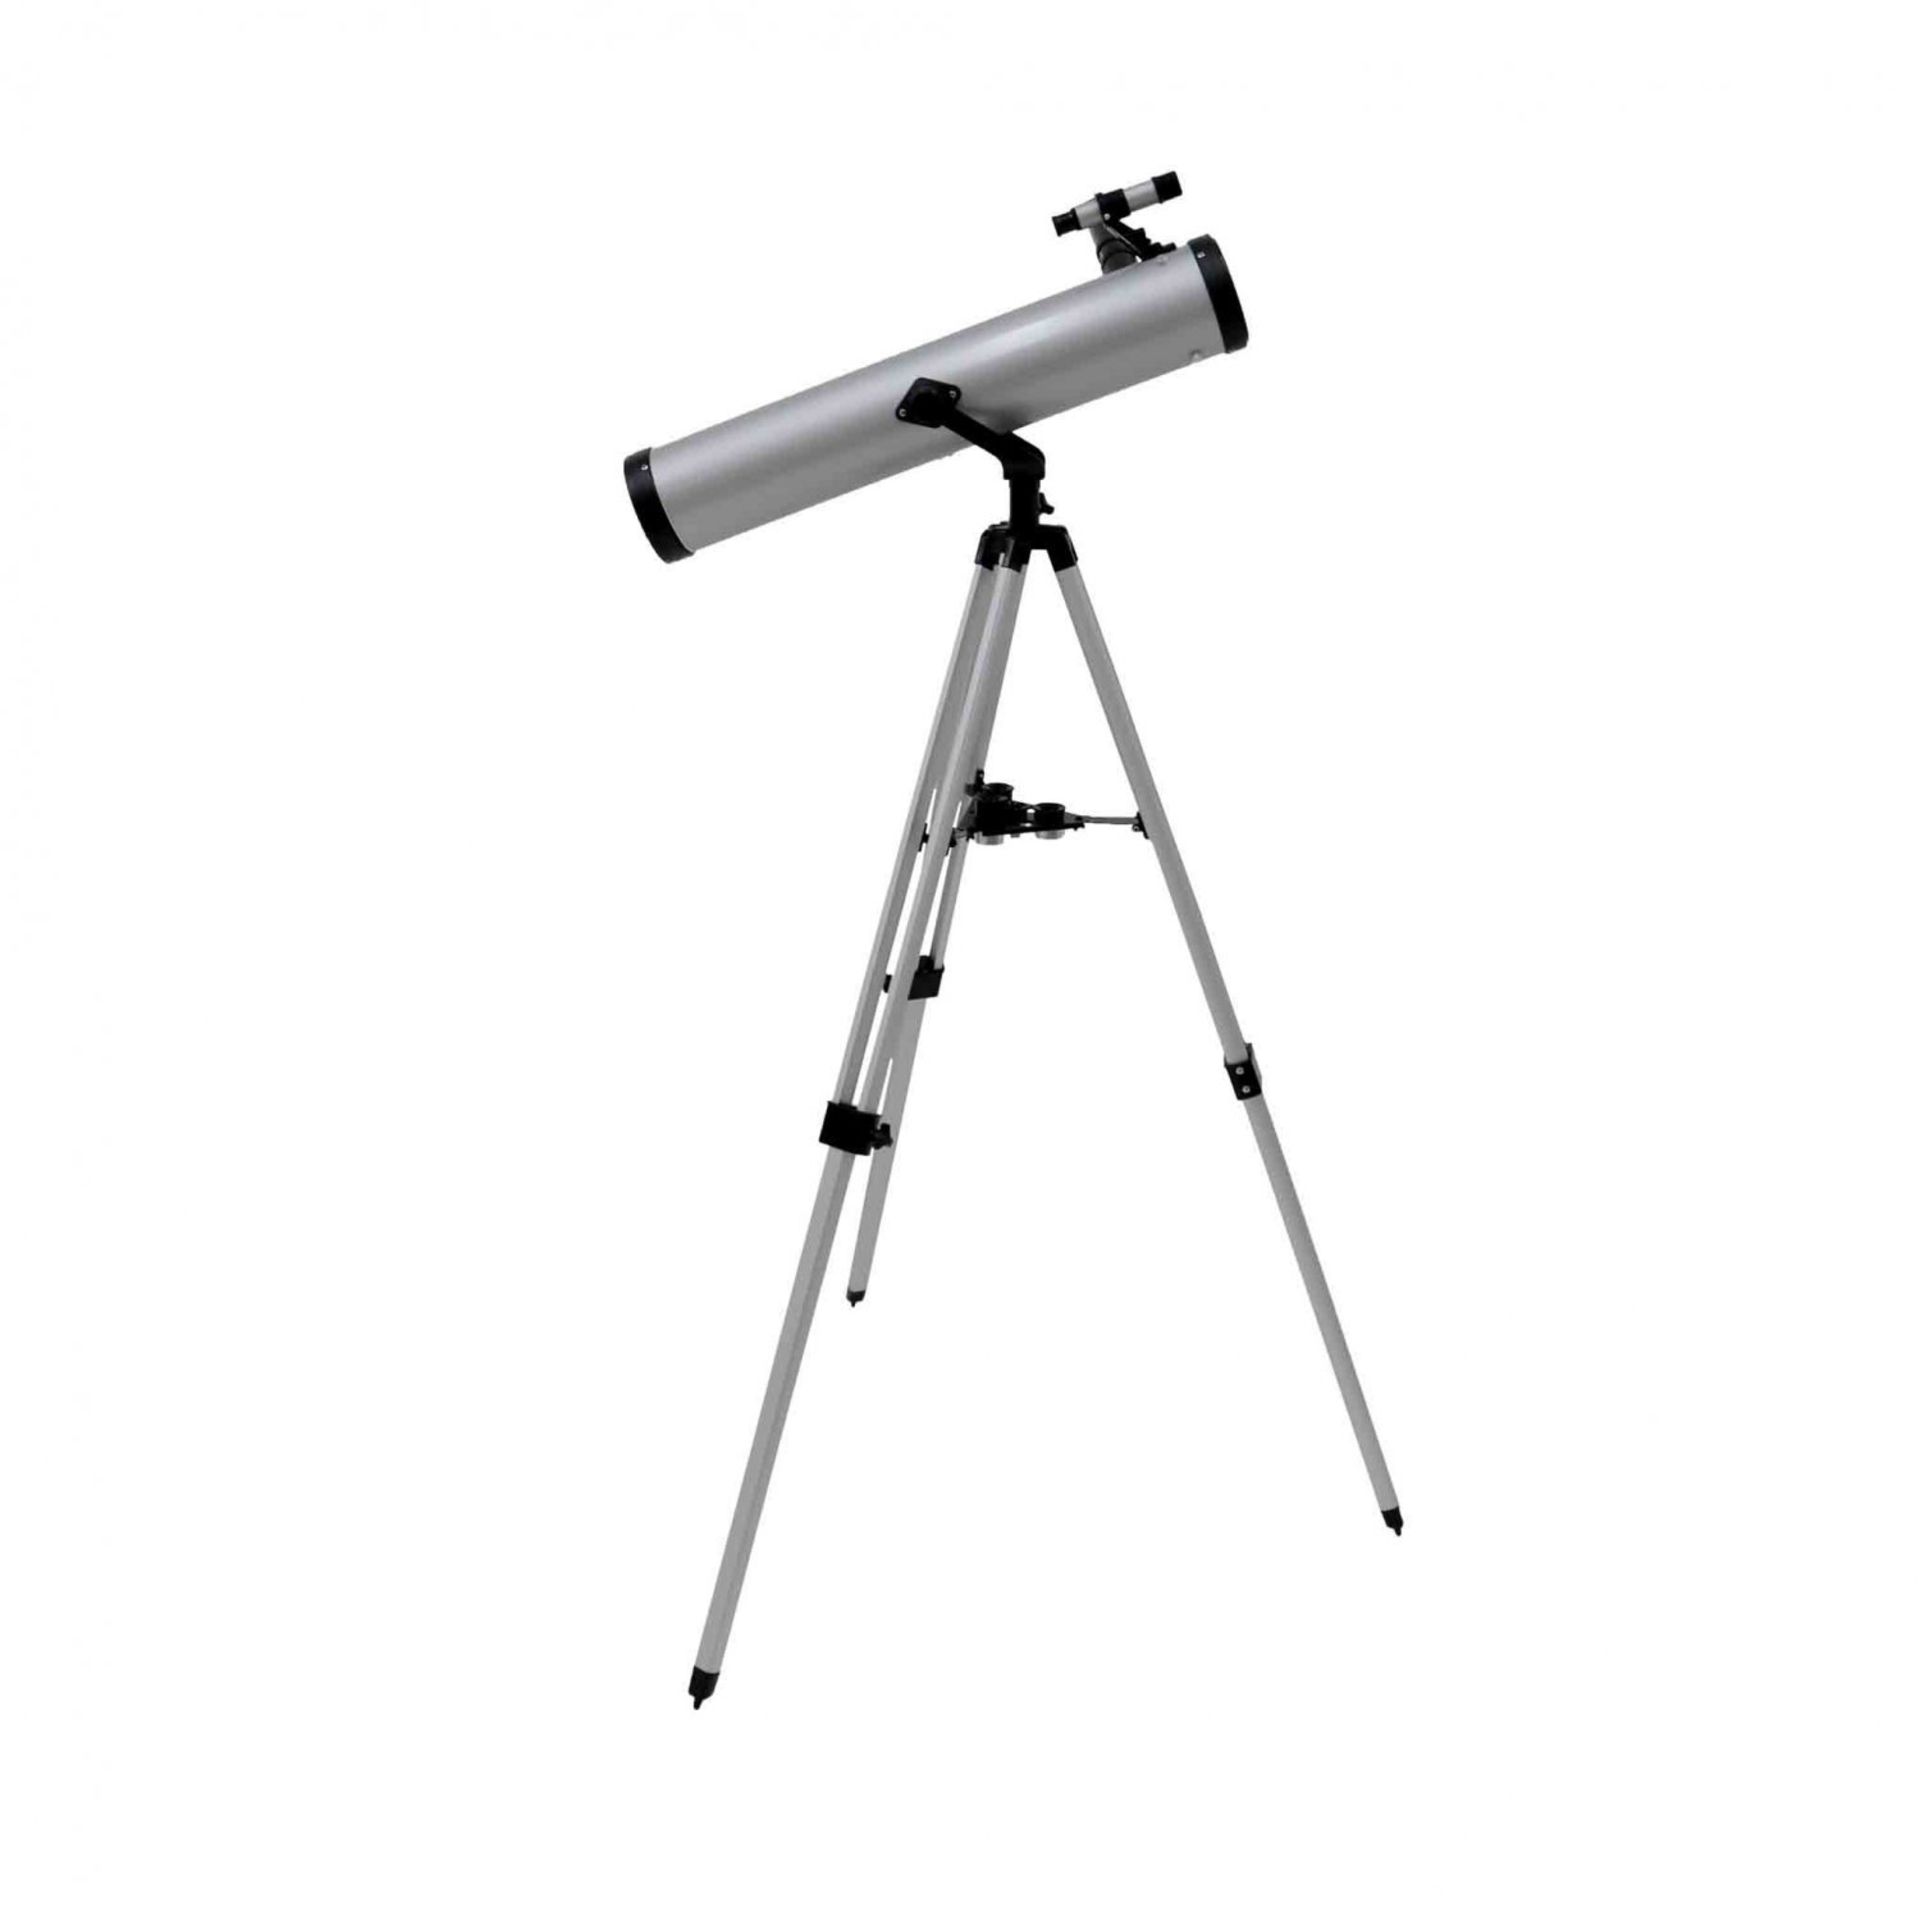 (RL59) Performance 700-76 Reflector Telescope Our high performance 700-76 reflector telescope,... - Image 2 of 2